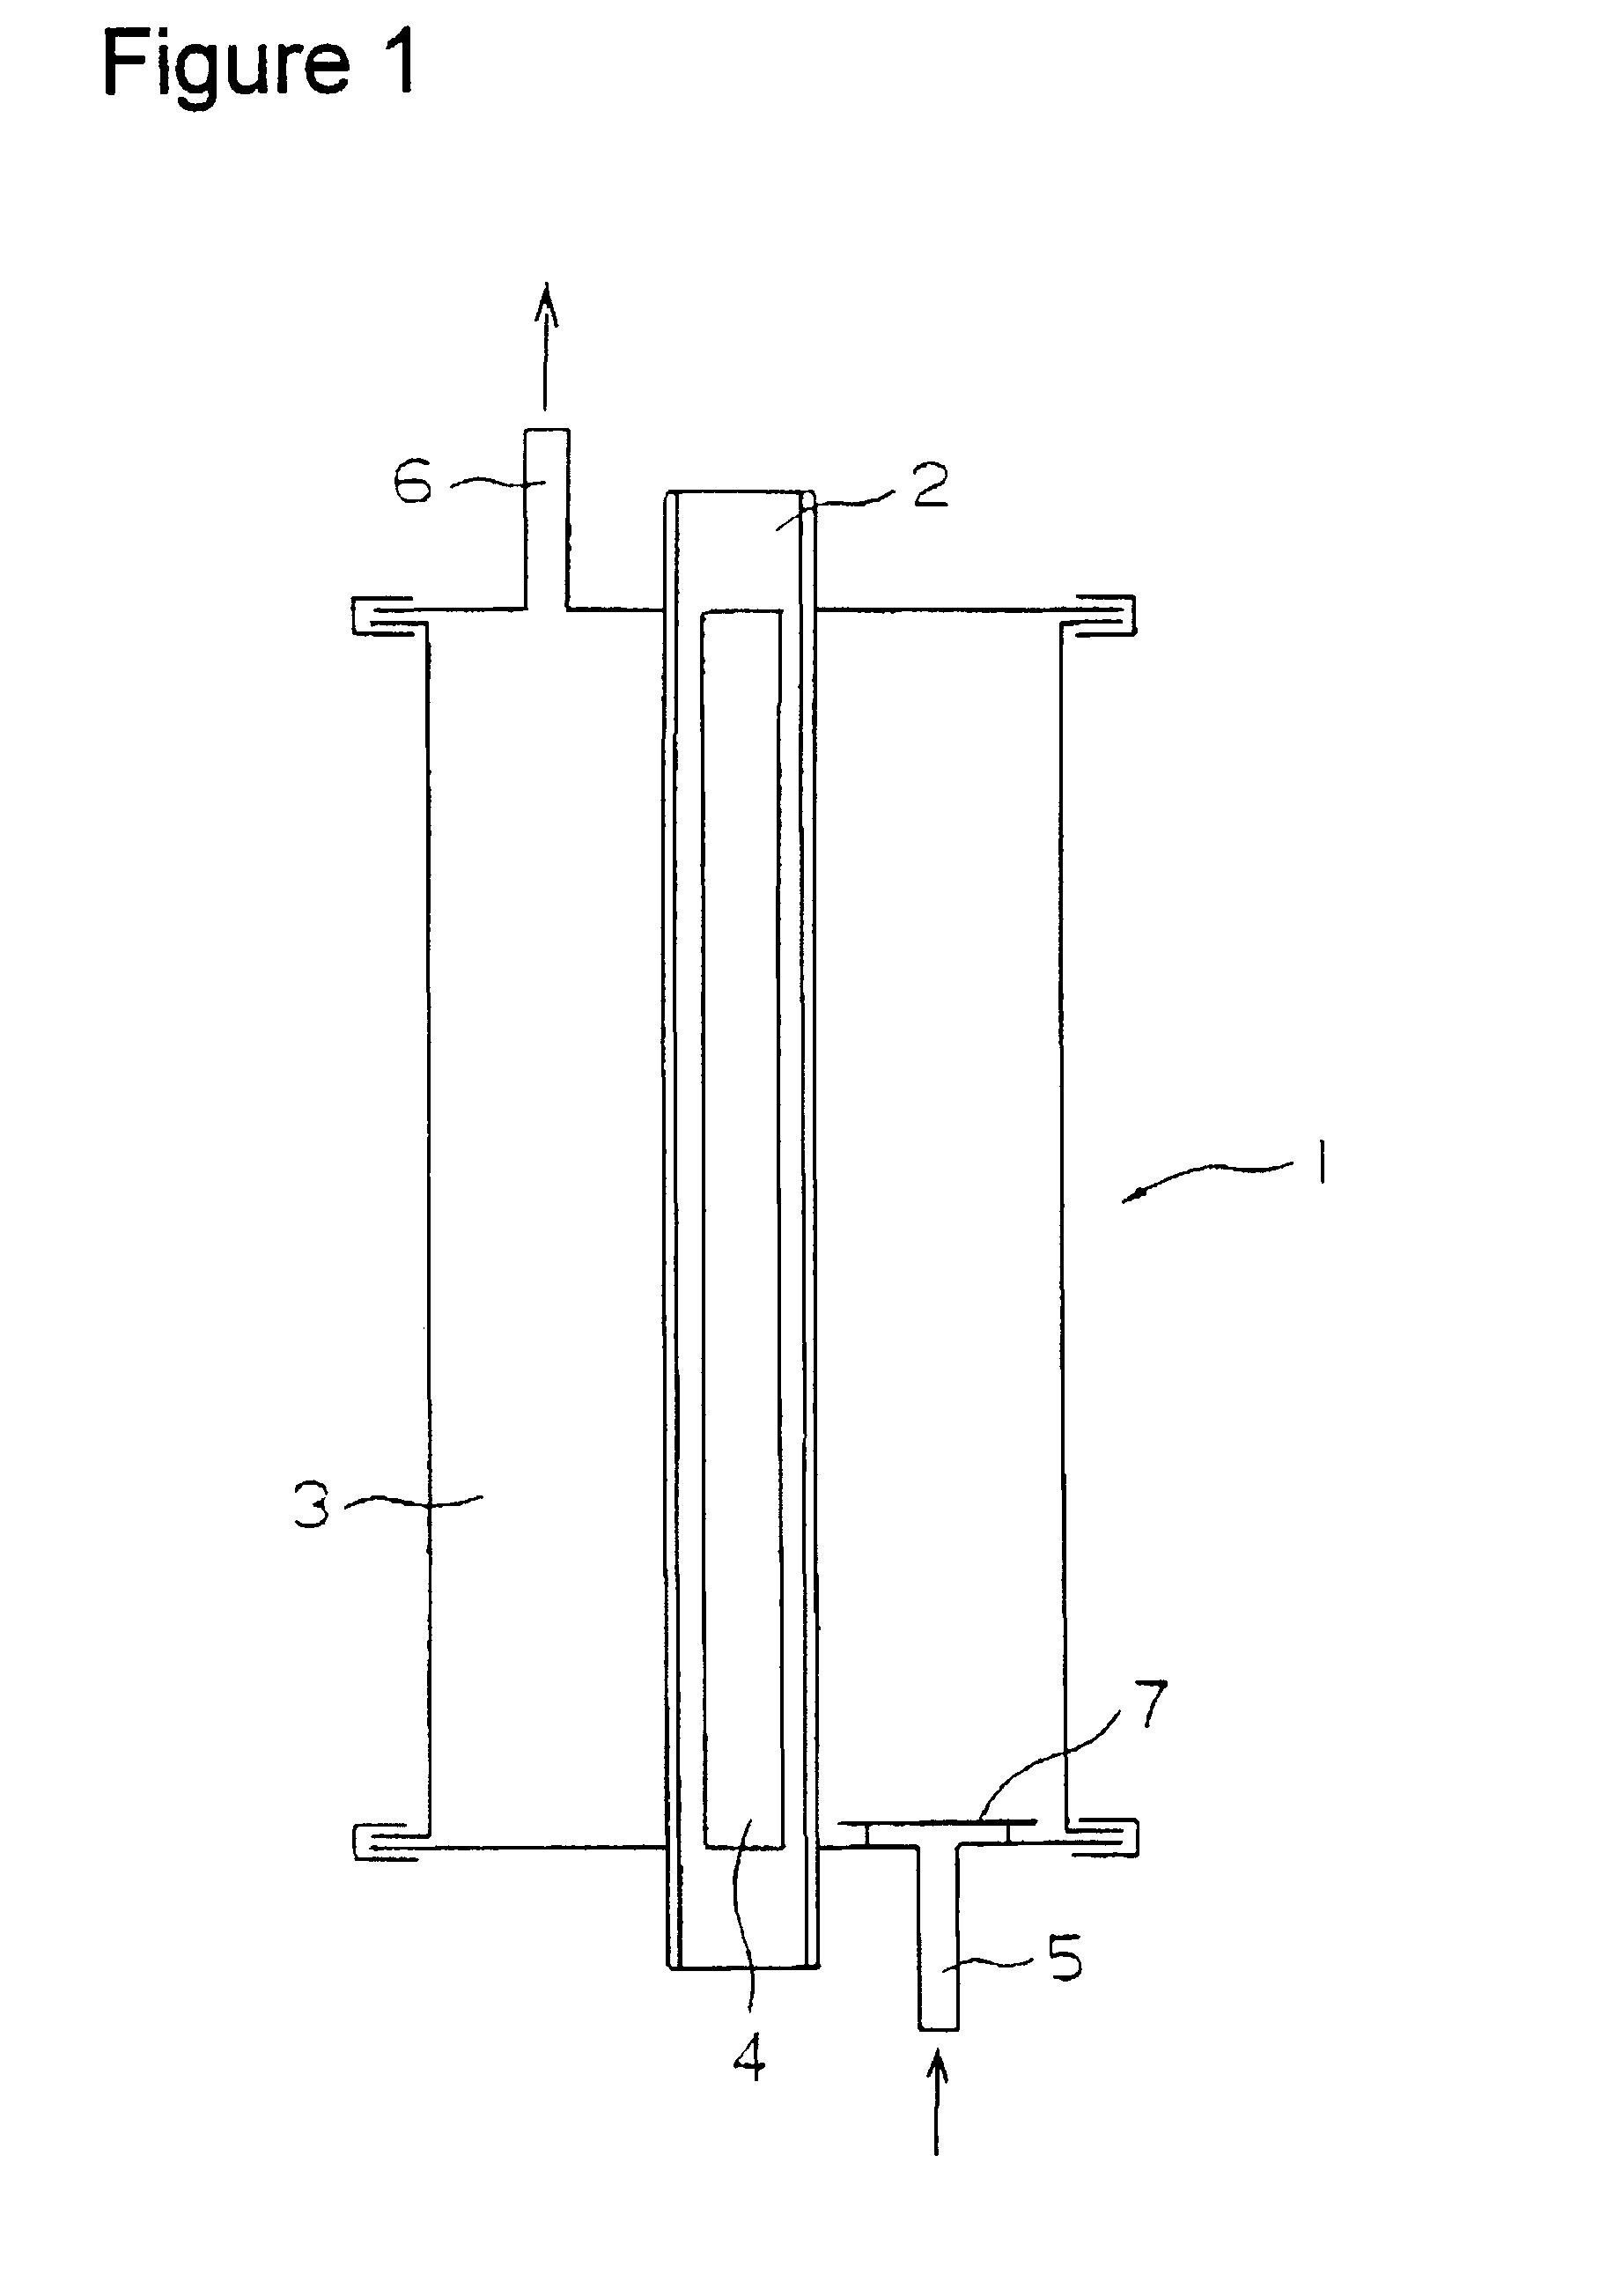 Photolytic device for breakdown of organic chlorine compounds